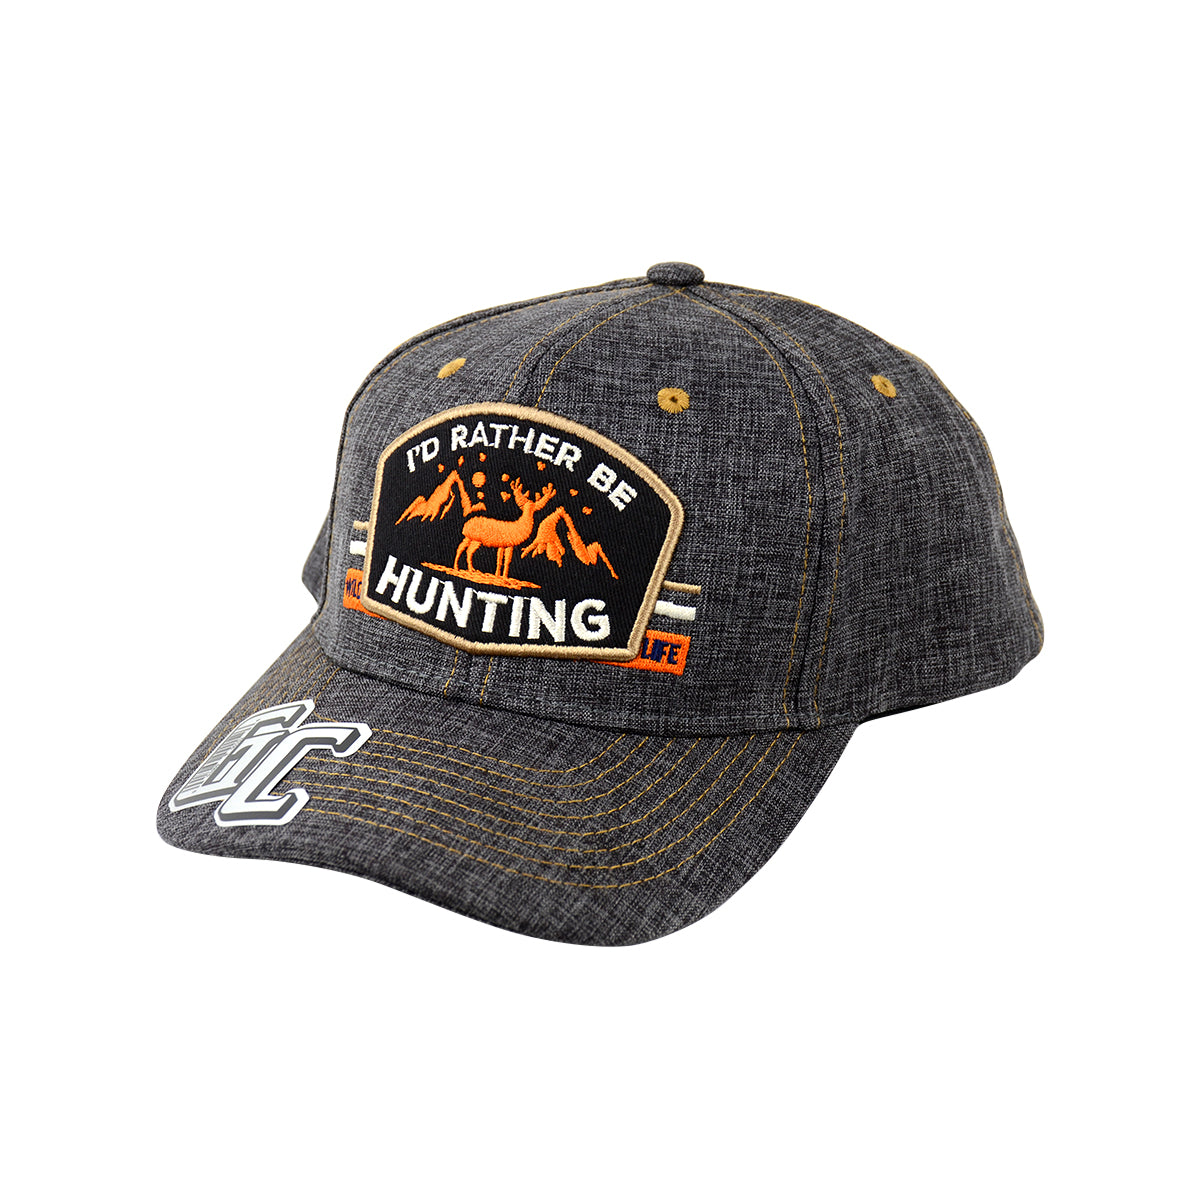 Snapback "I'D Rather Be Hunting" Hat Embroidered